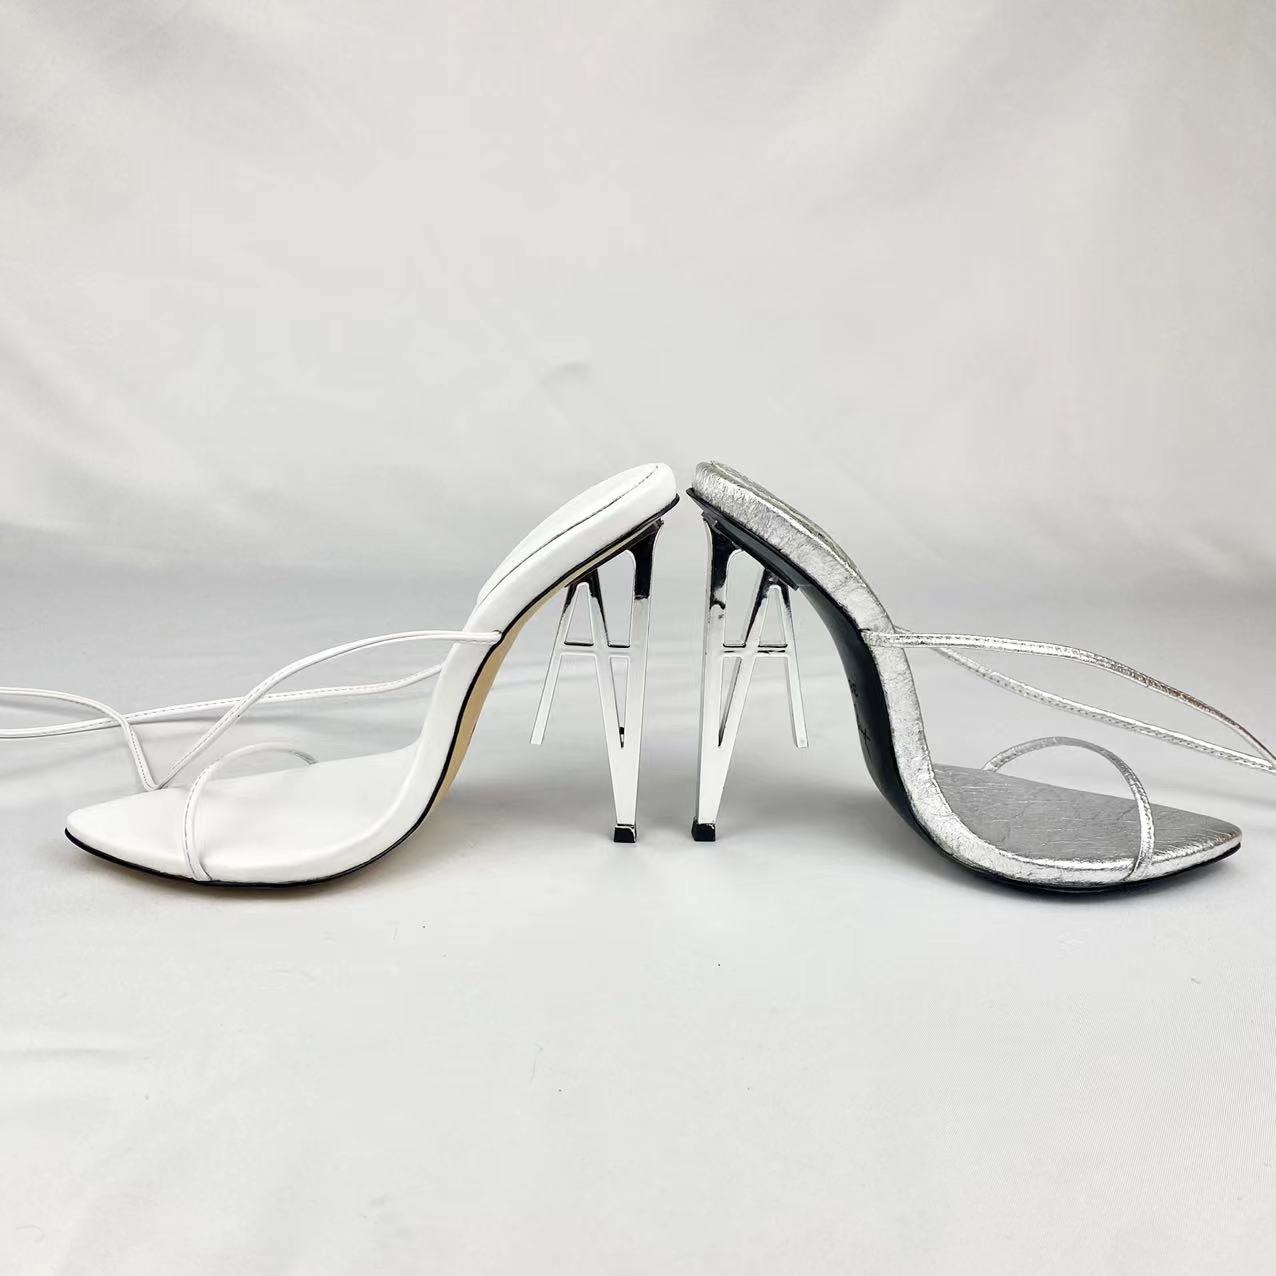 https://www.lishangzishoes.com/news/custom-women-sandals-letter-a-heel-design-with-sustainable-materials/